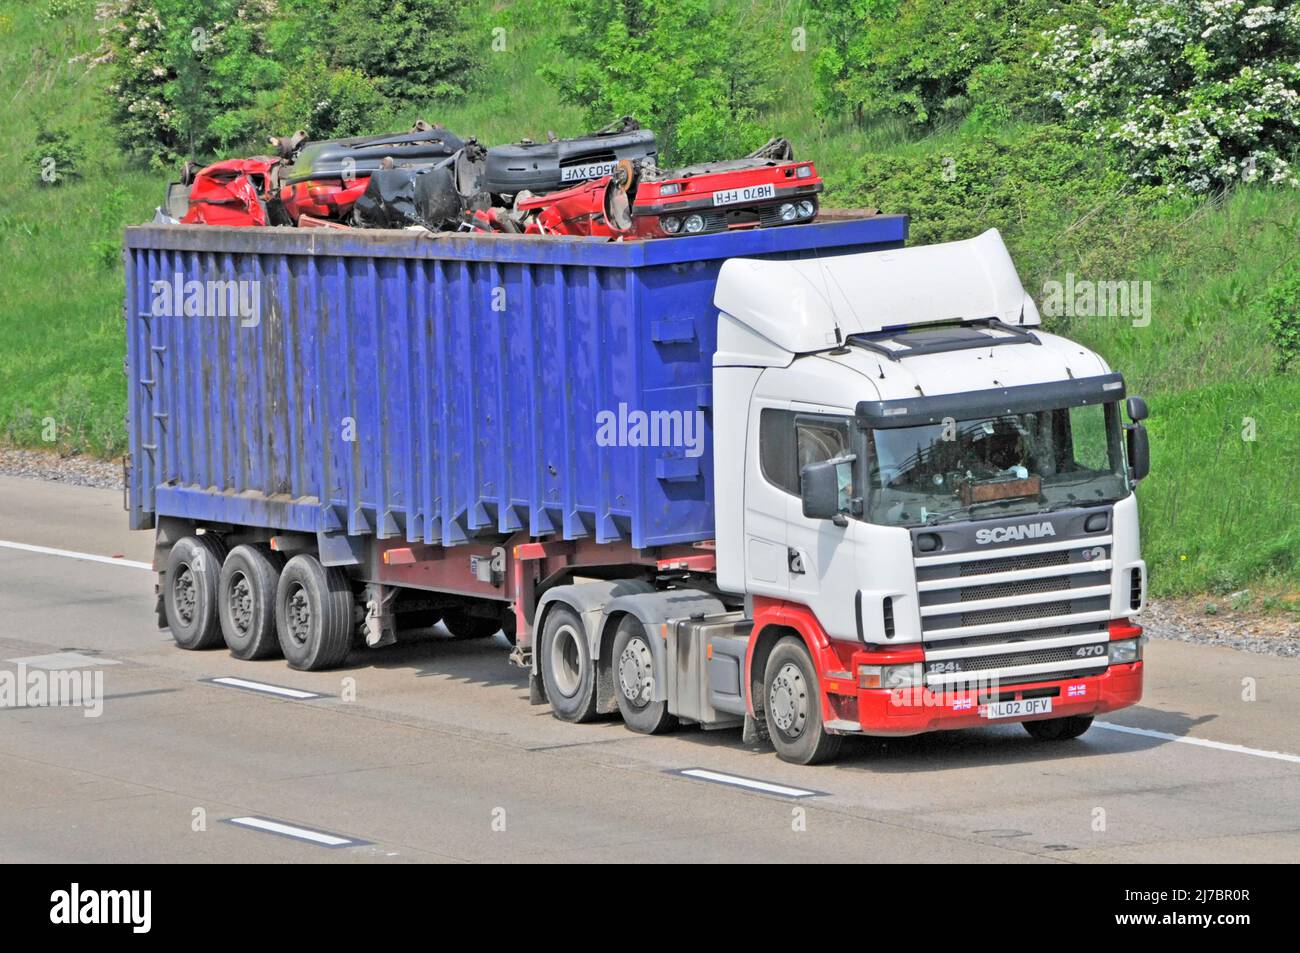 White unmarked hgv SCANIA lorry truck & blue articulated tipper trailer loaded with wrecked crushed scrap metal car bodies driving on UK motorway road Stock Photo